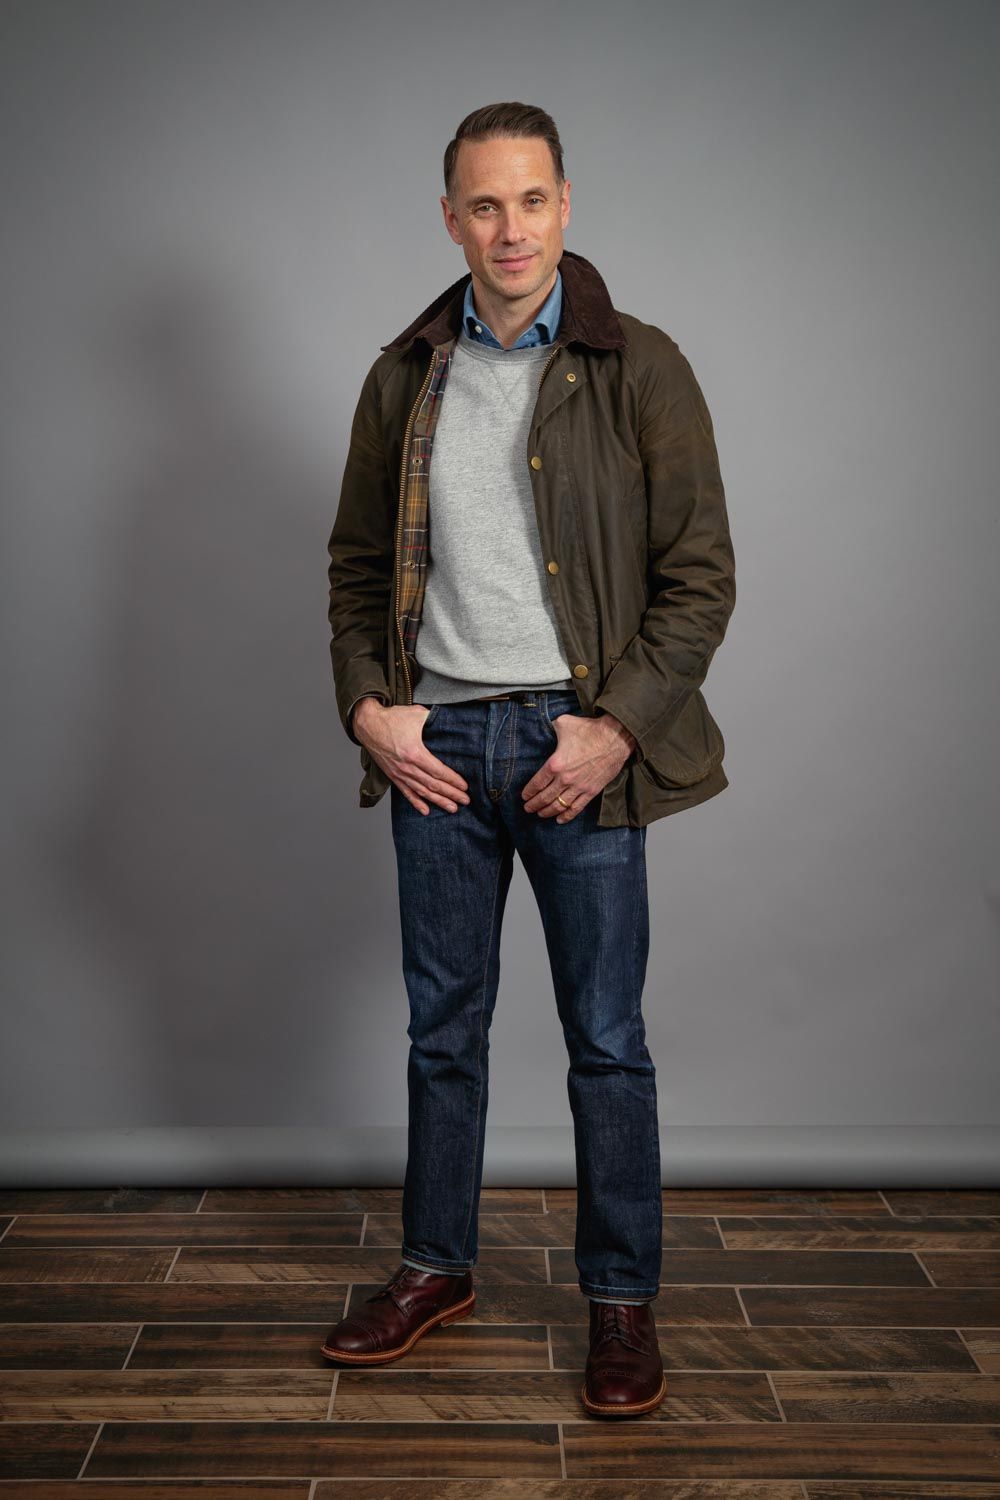 Barbour-jacket-and-jeans-and-boots-for-men-winter-2021.jpeg